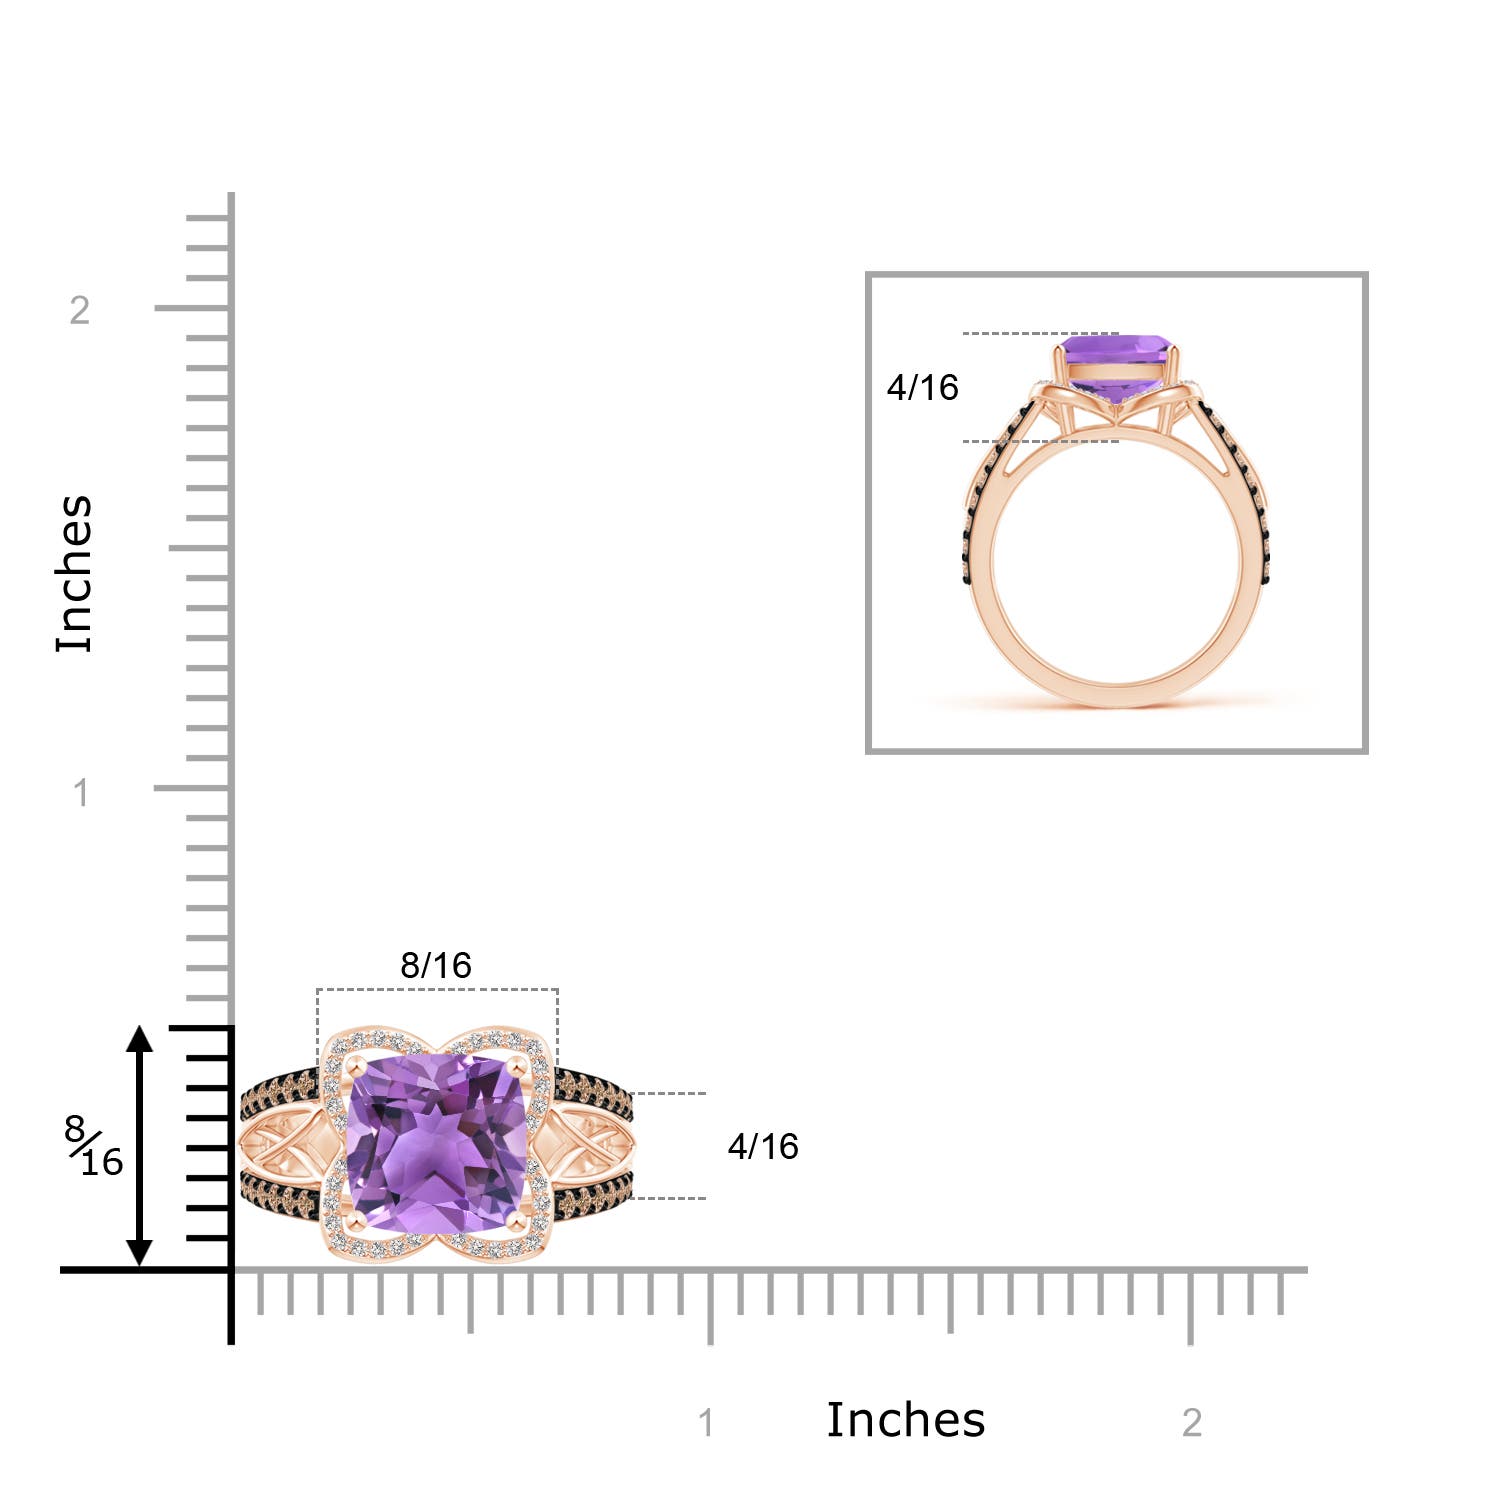 AA - Amethyst / 3.61 CT / 14 KT Rose Gold